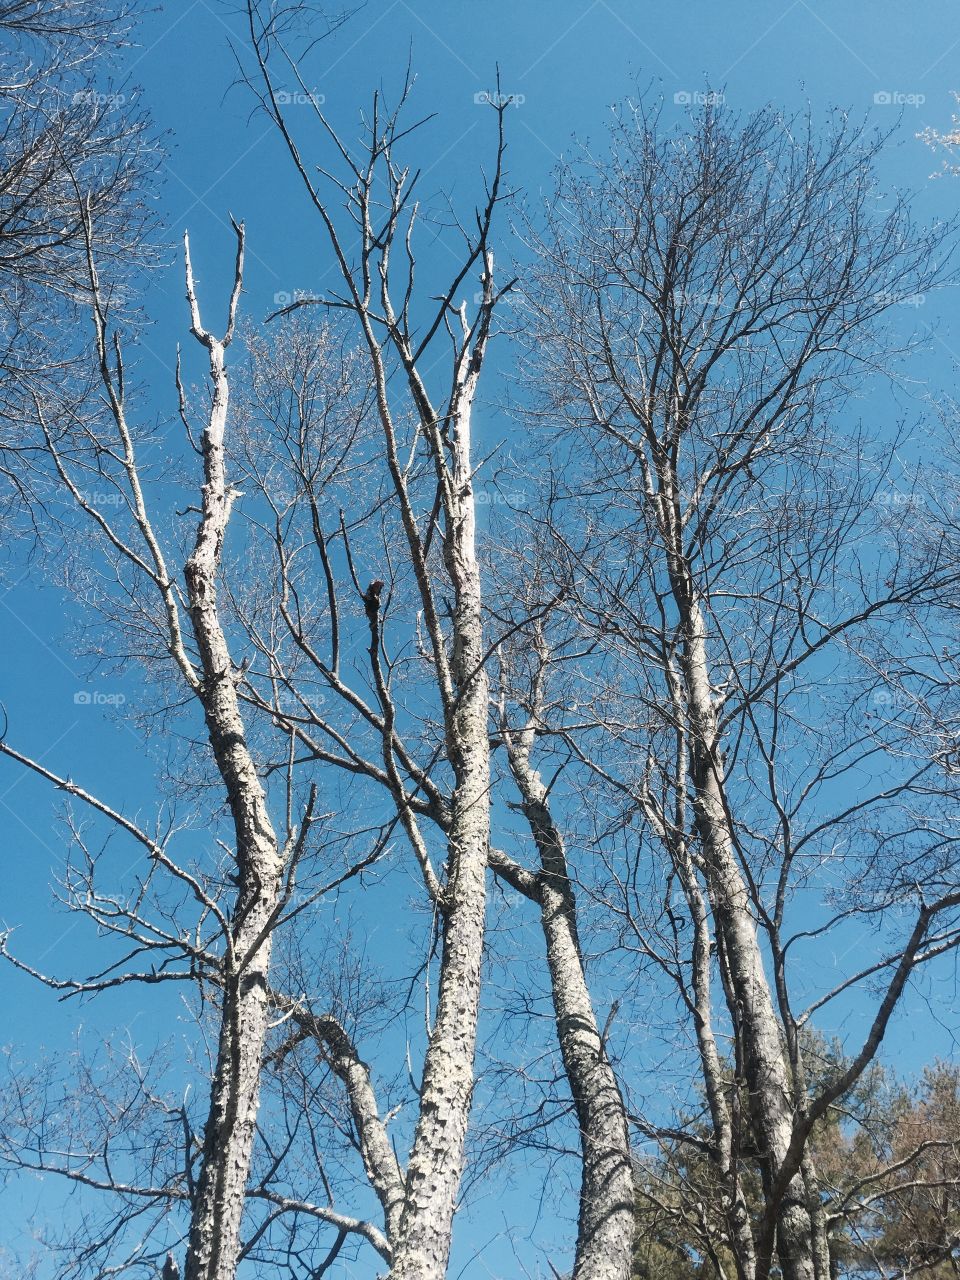 Dying trees with blue sky backdrop
Upstate New York